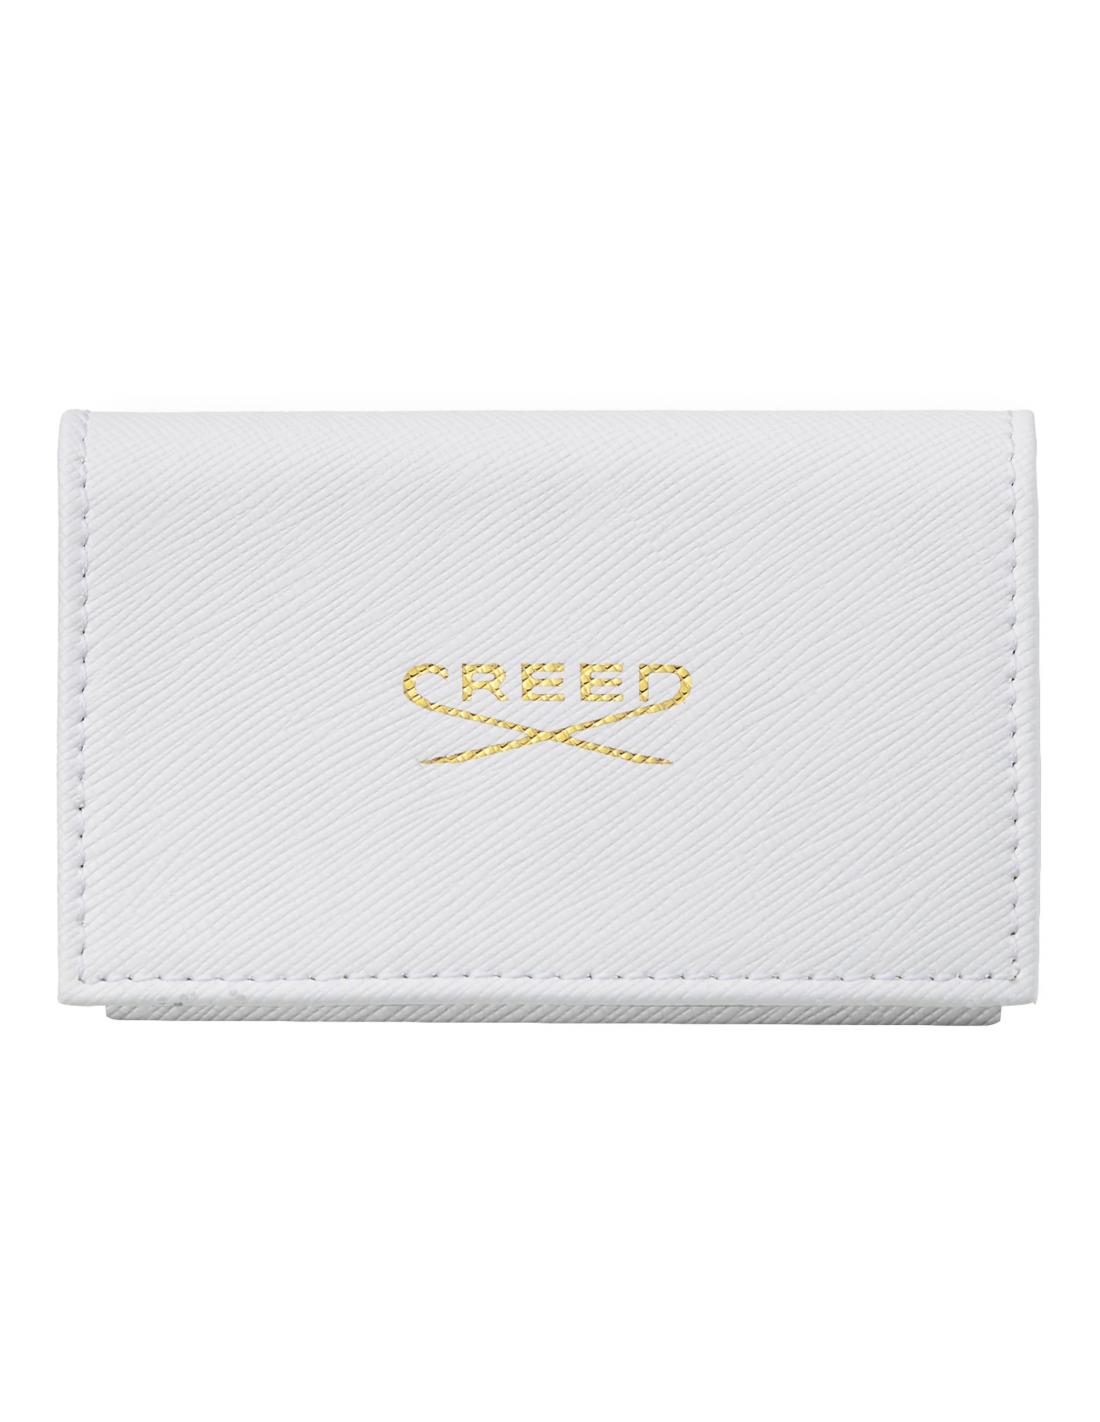 Creed official sample set with luxury leather case - womens